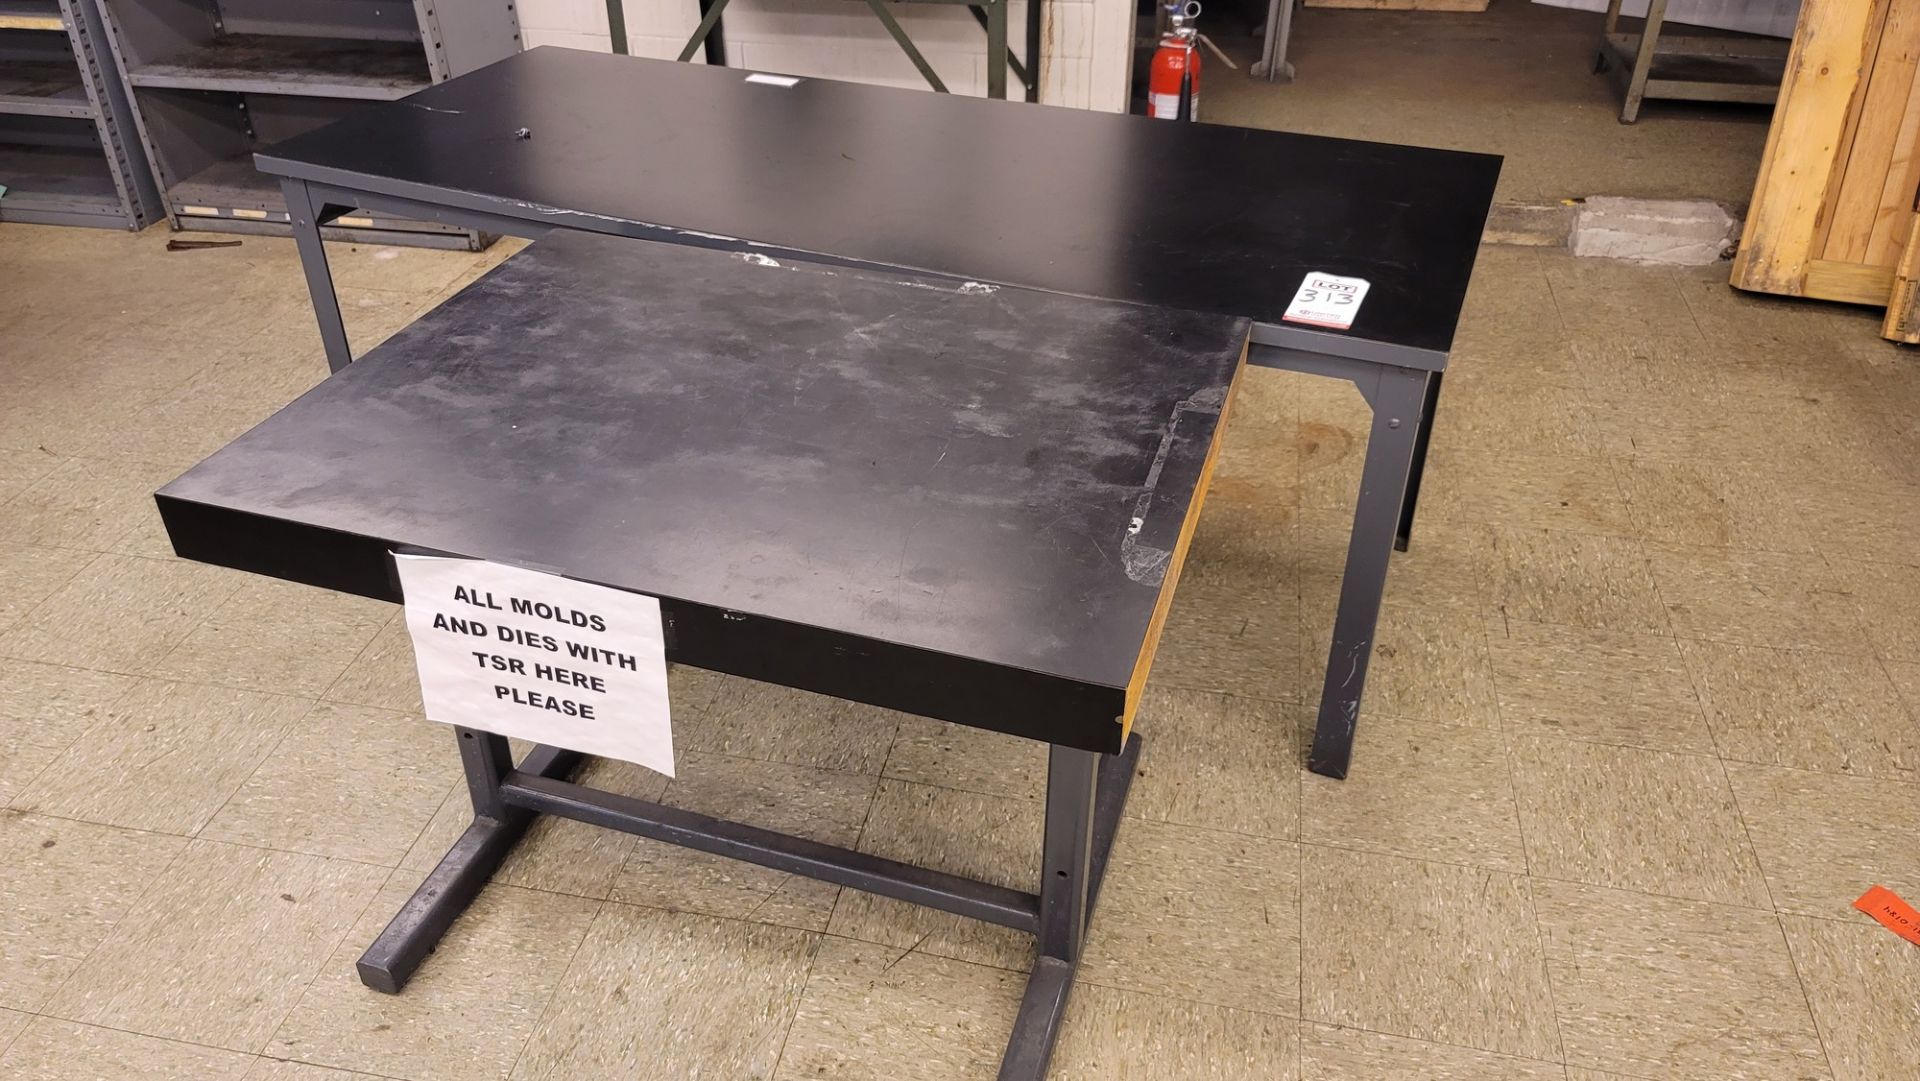 LOT - (2) TABLES: 6' X 30" X 28" AND 38" X 30" X 28"